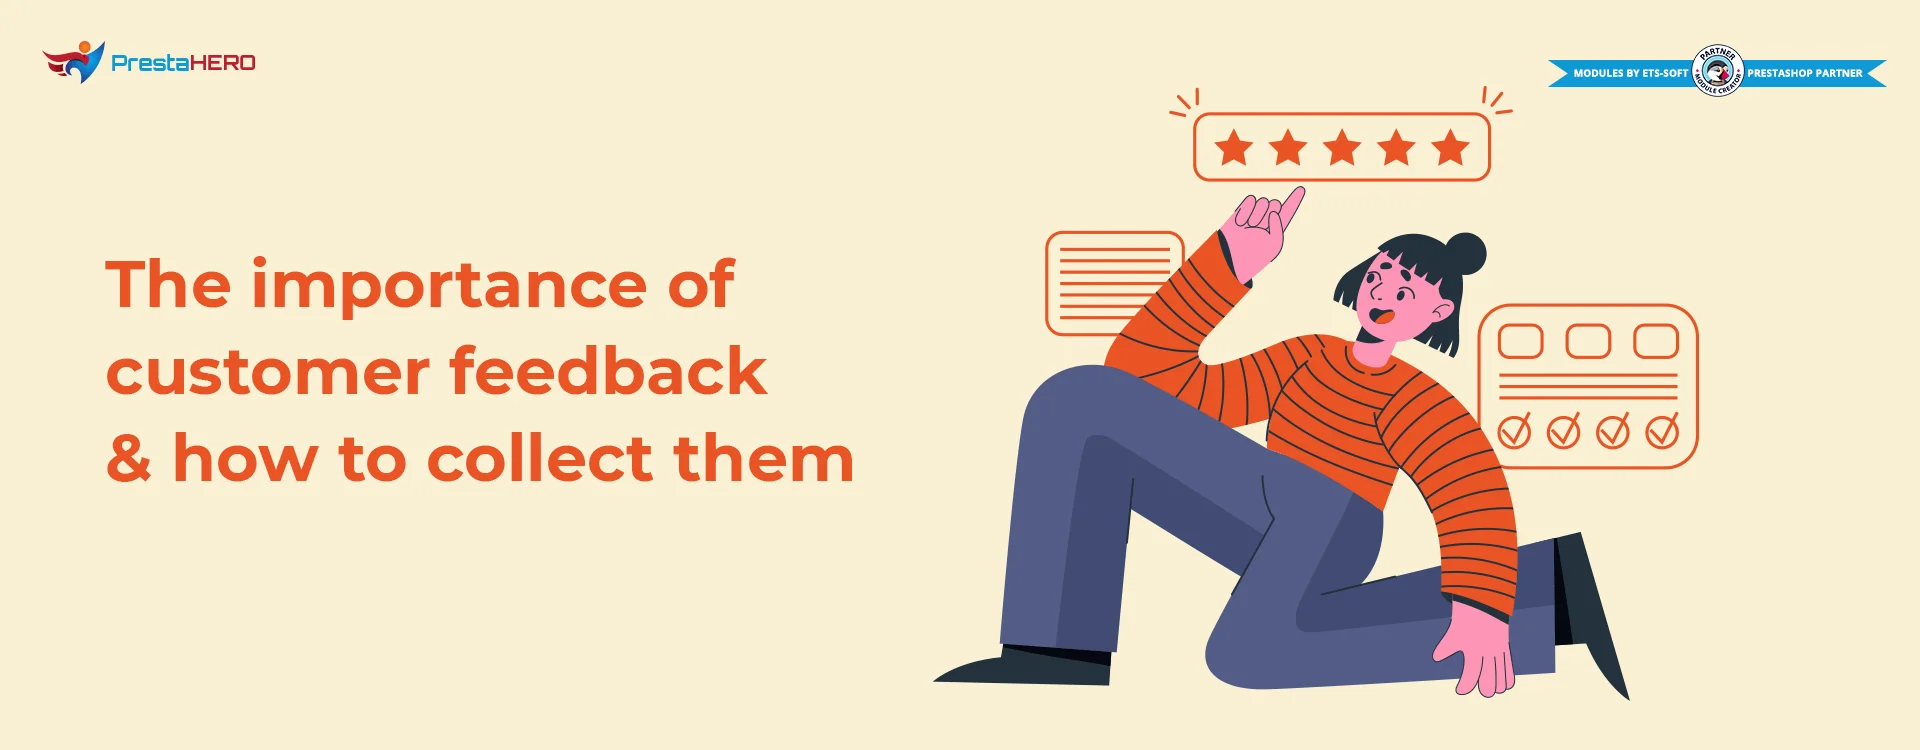 The importance of customer feedback and how to collect them.